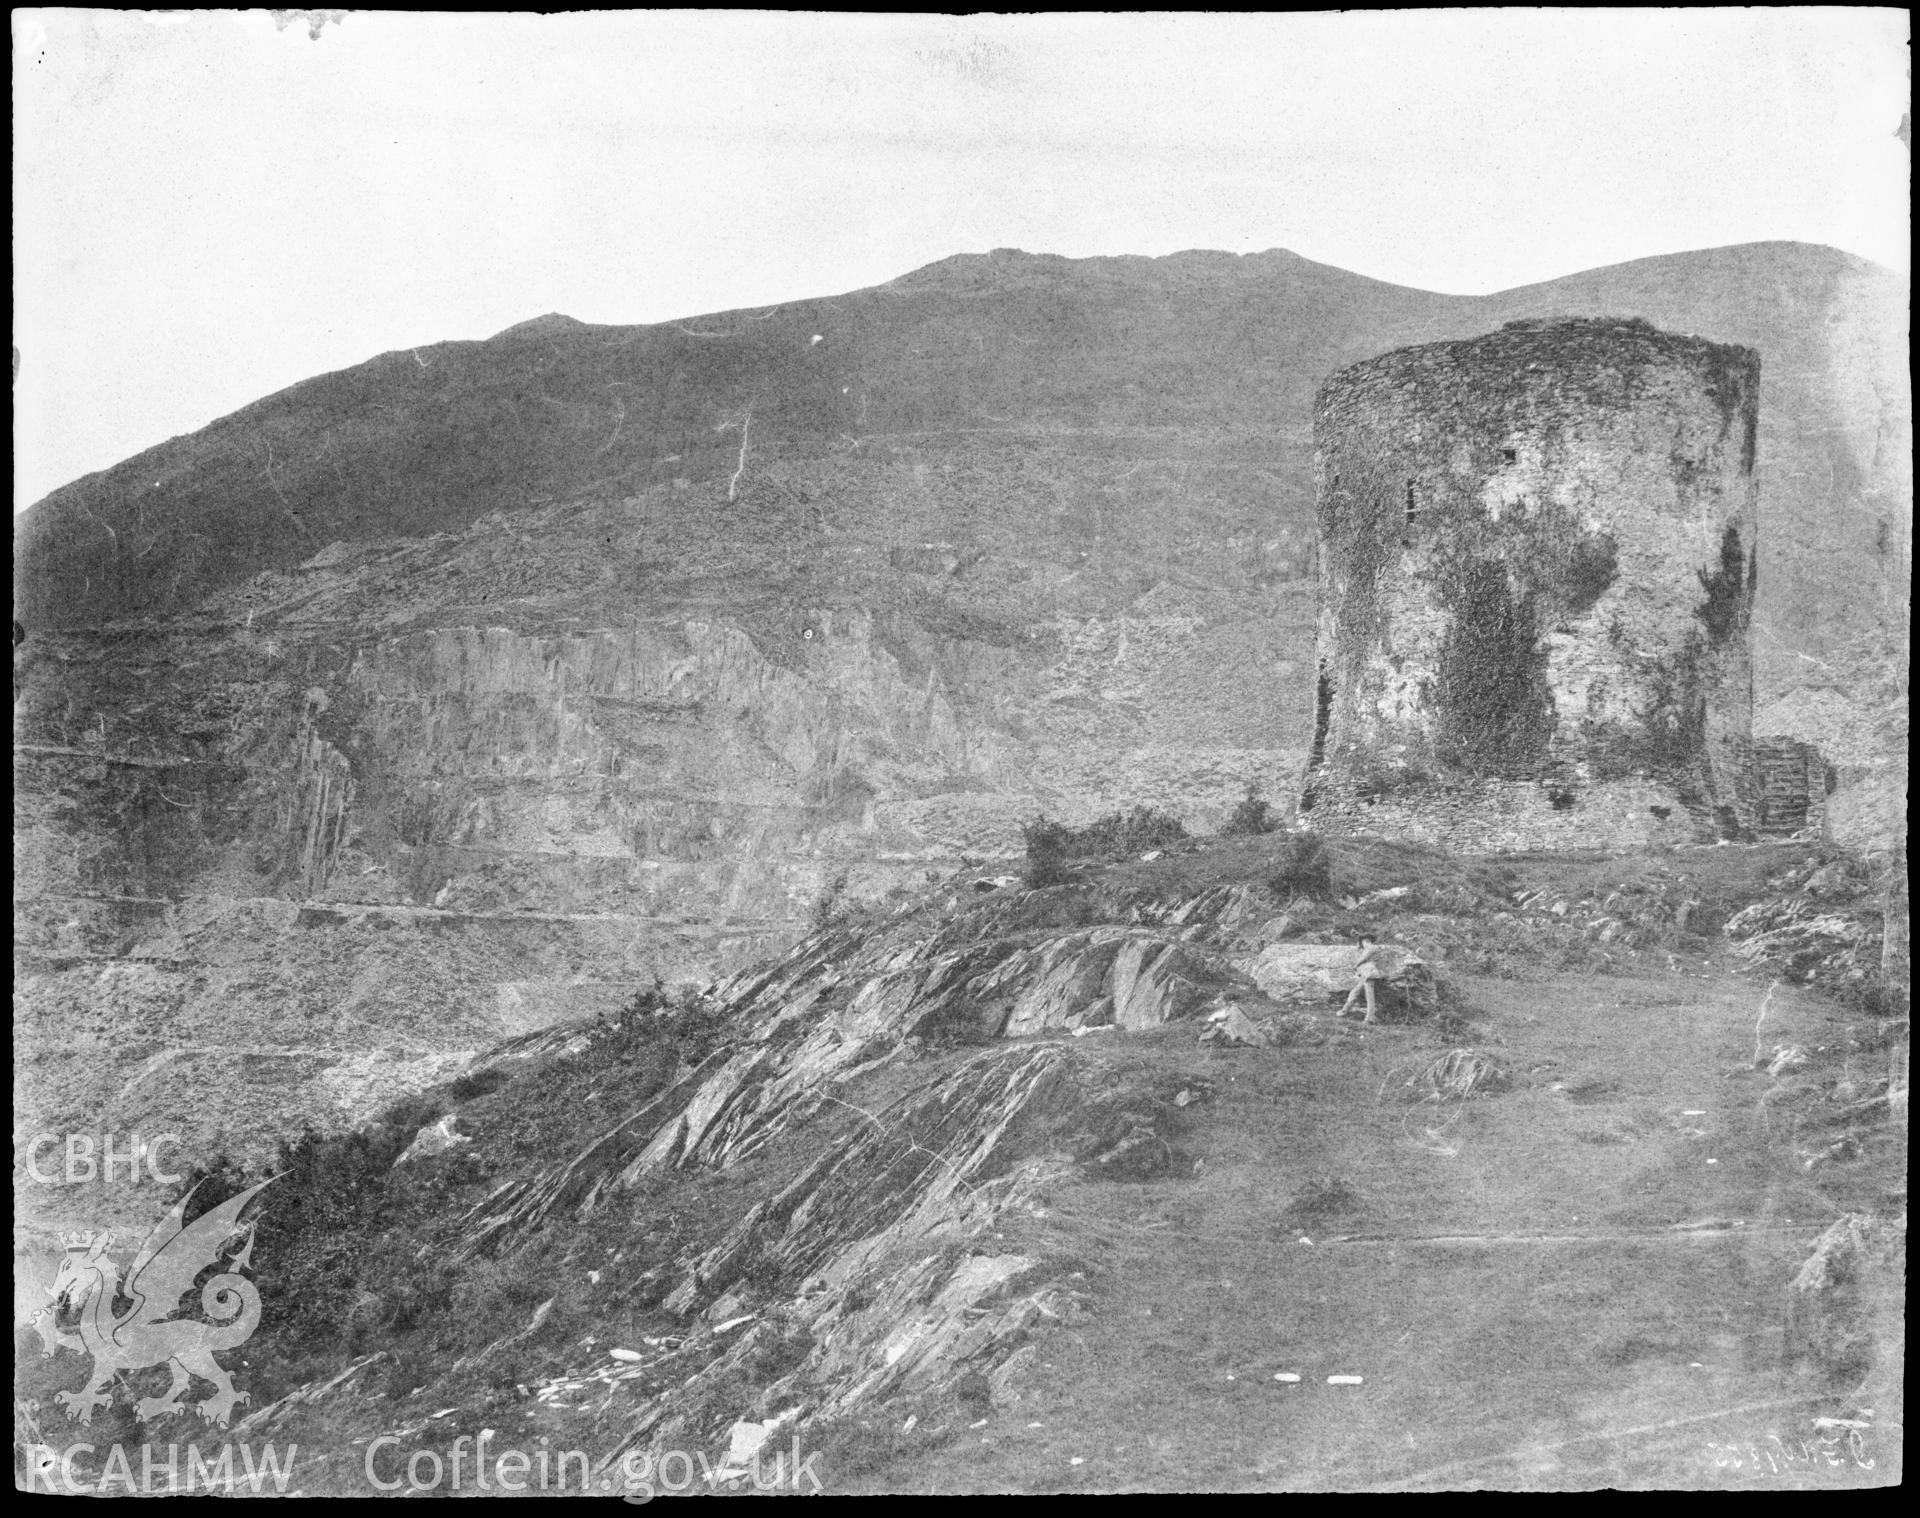 Photograph of Dolbadarn Castle, produced from a copy negative of a large print.